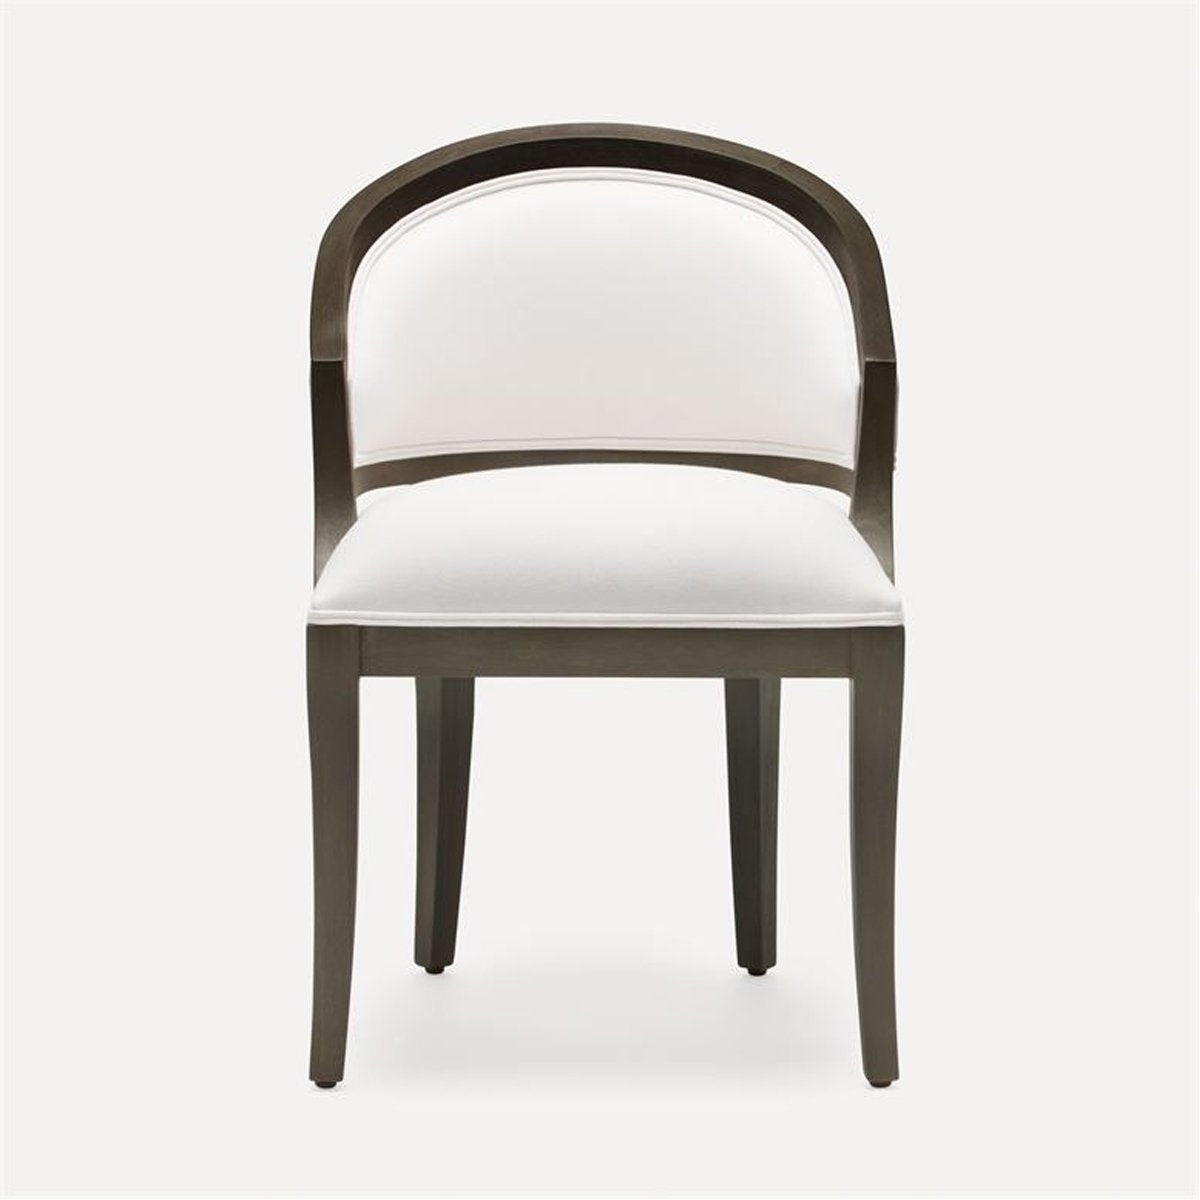 Made Goods Sylvie Curved Back Dining Chair, Danube Fabric